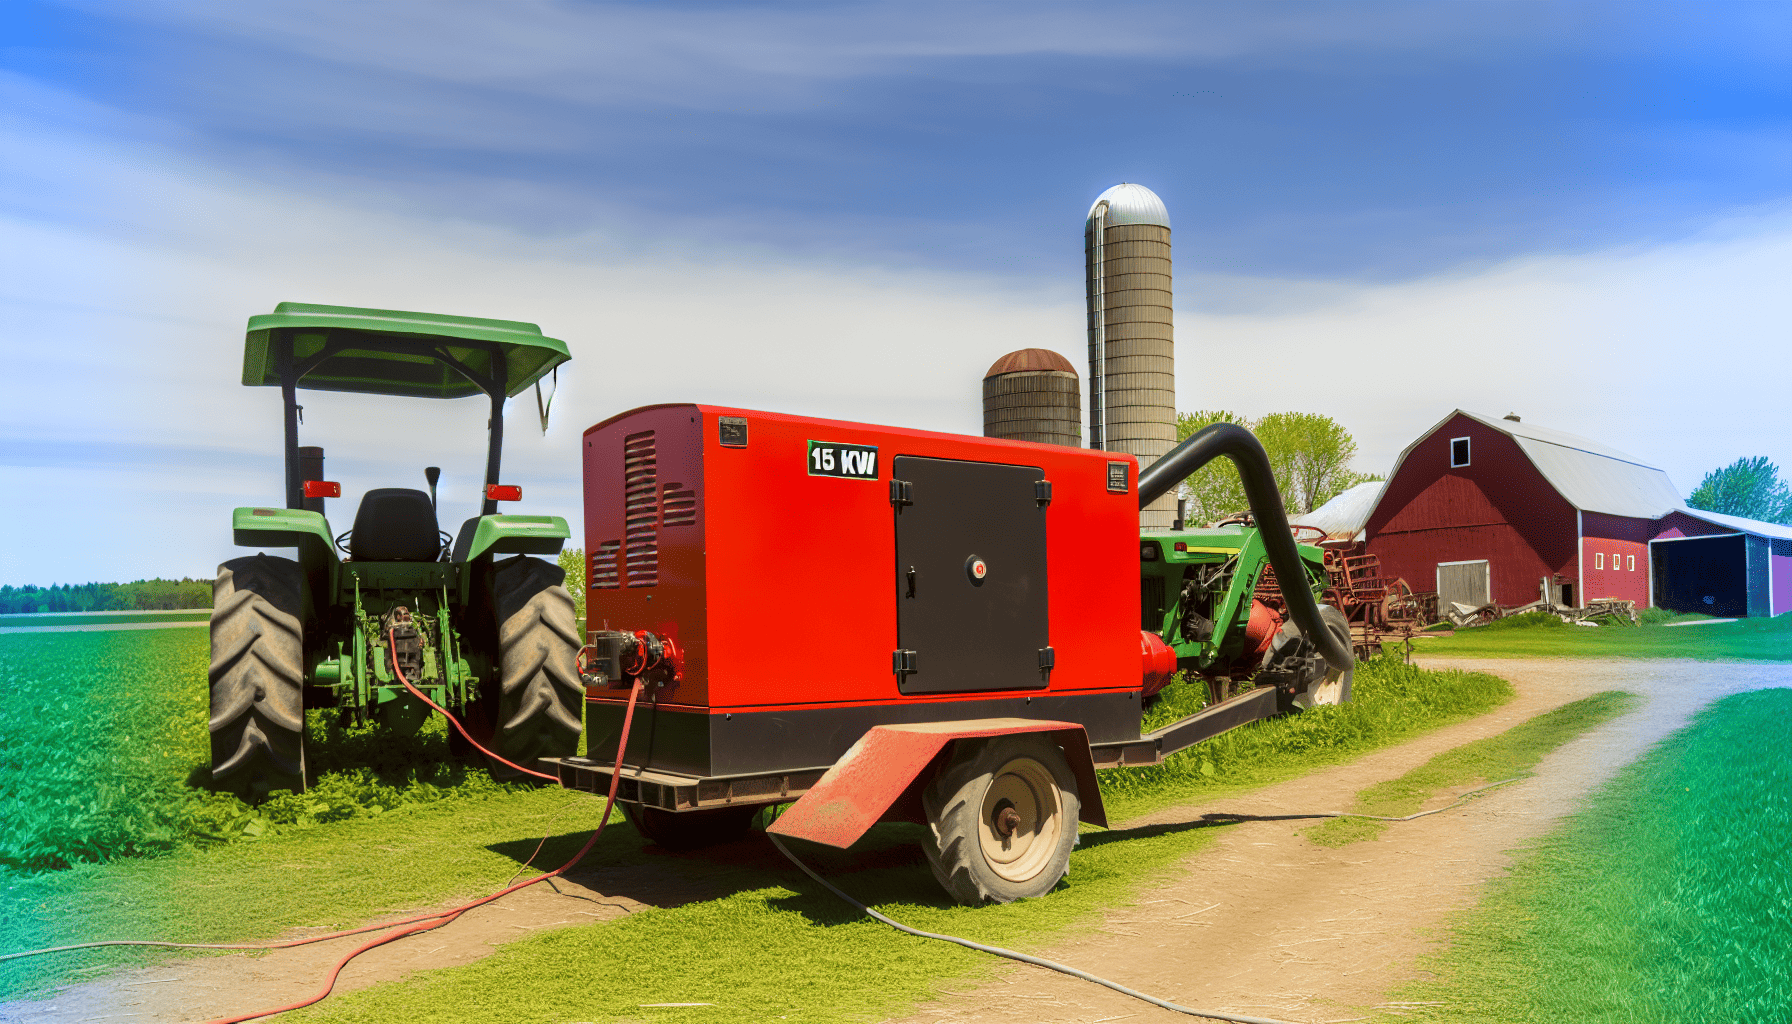 A 15 kW PTO generator attached to a tractor in a farm setting